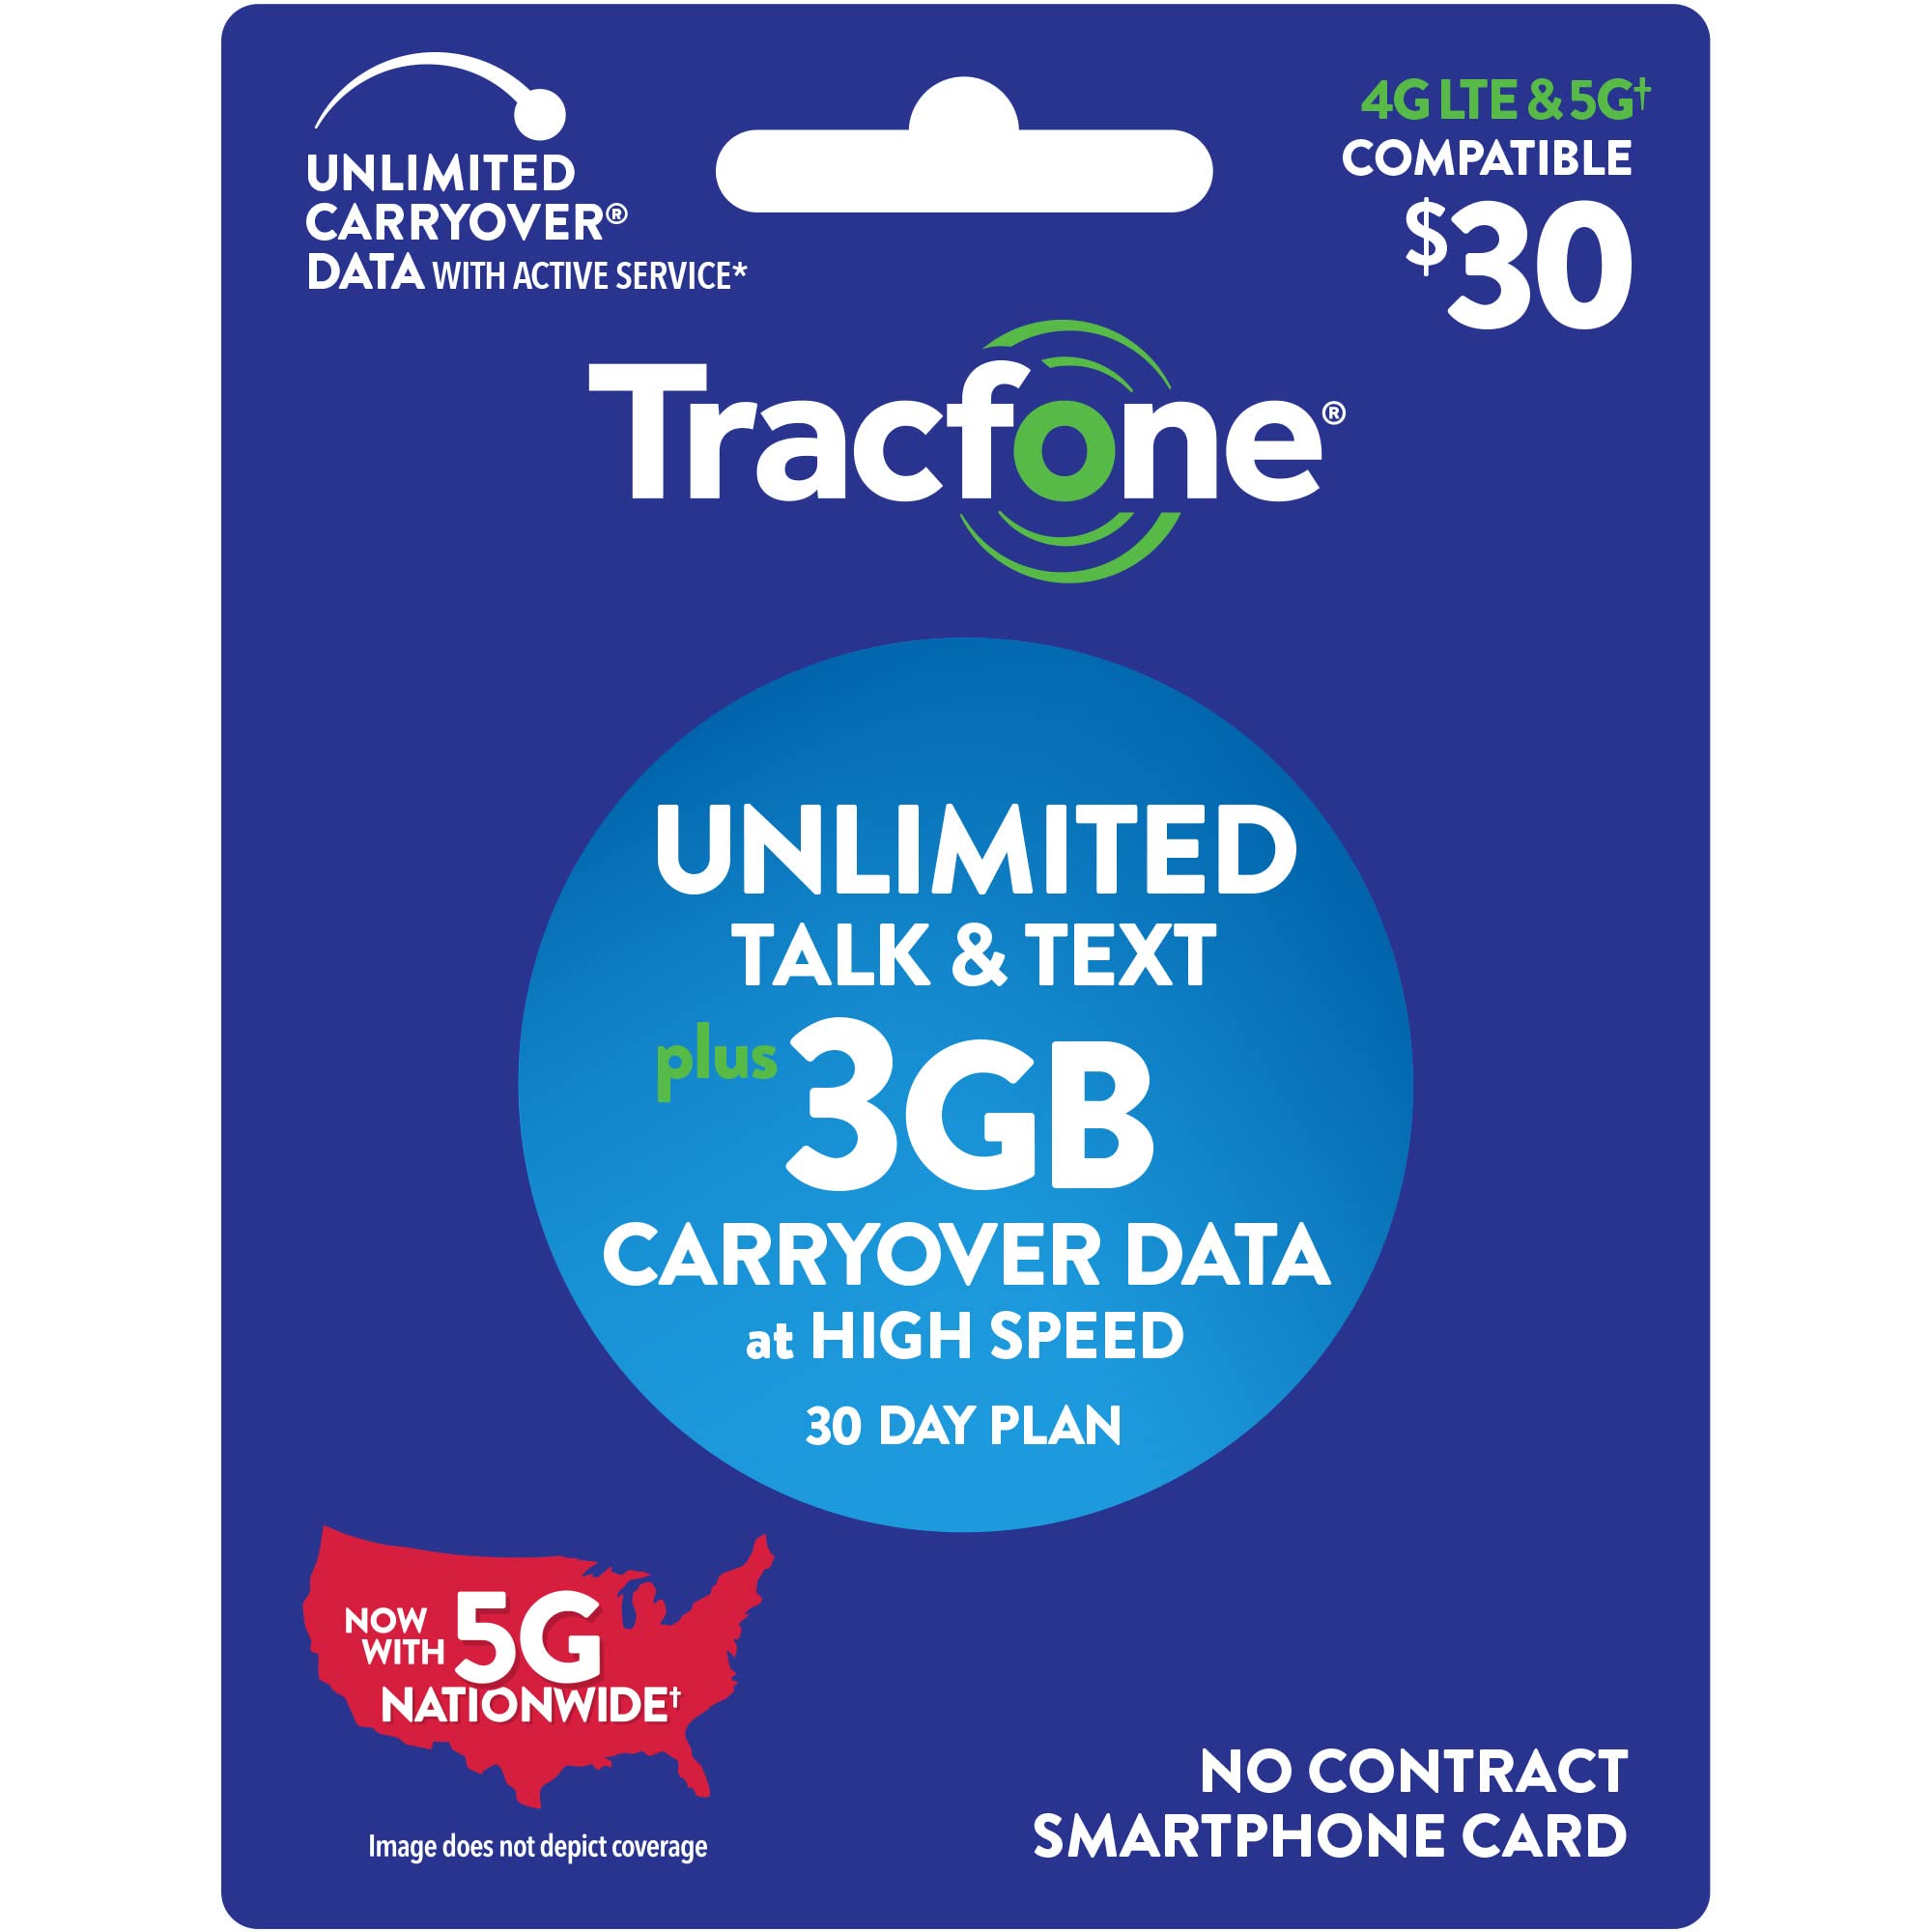 New Tracfone $30 Unlimited Talk, Text, 3GB Data - 30 Day Smartphone Plan